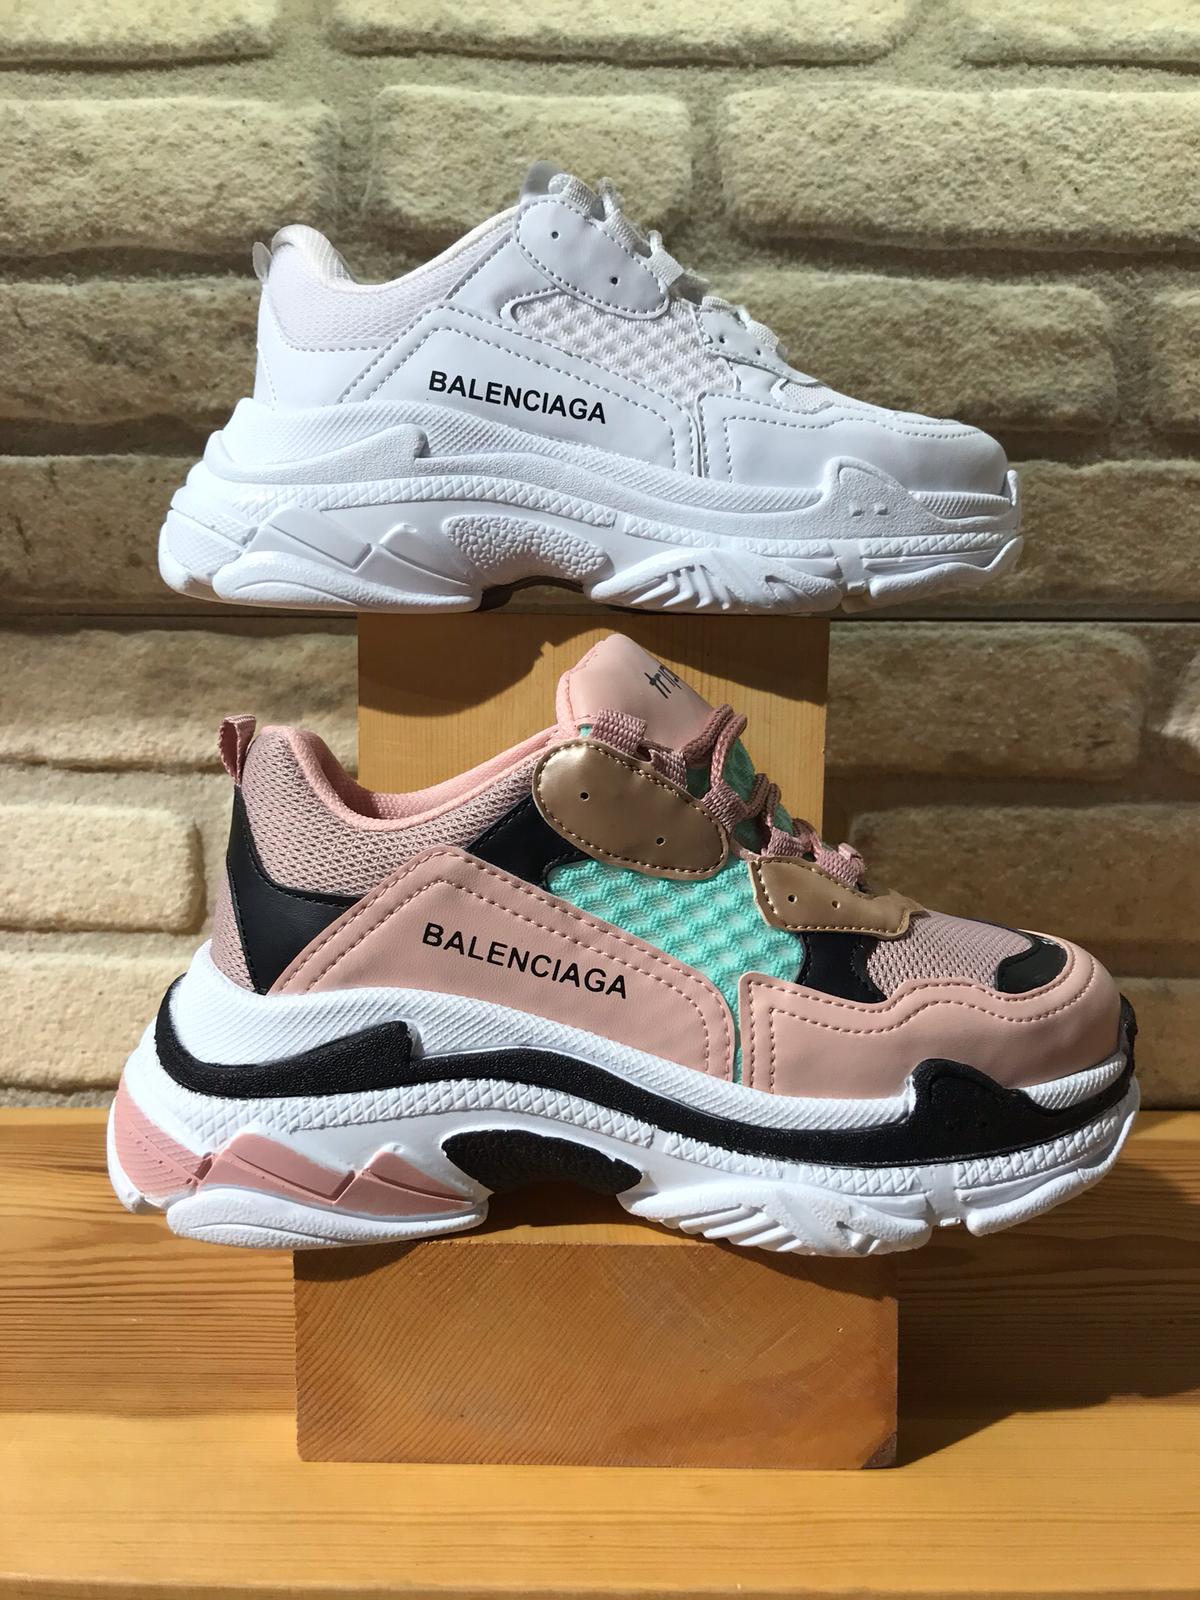 [W2C] Balenciaga Track Sneakers (any colorway but I prefer the all